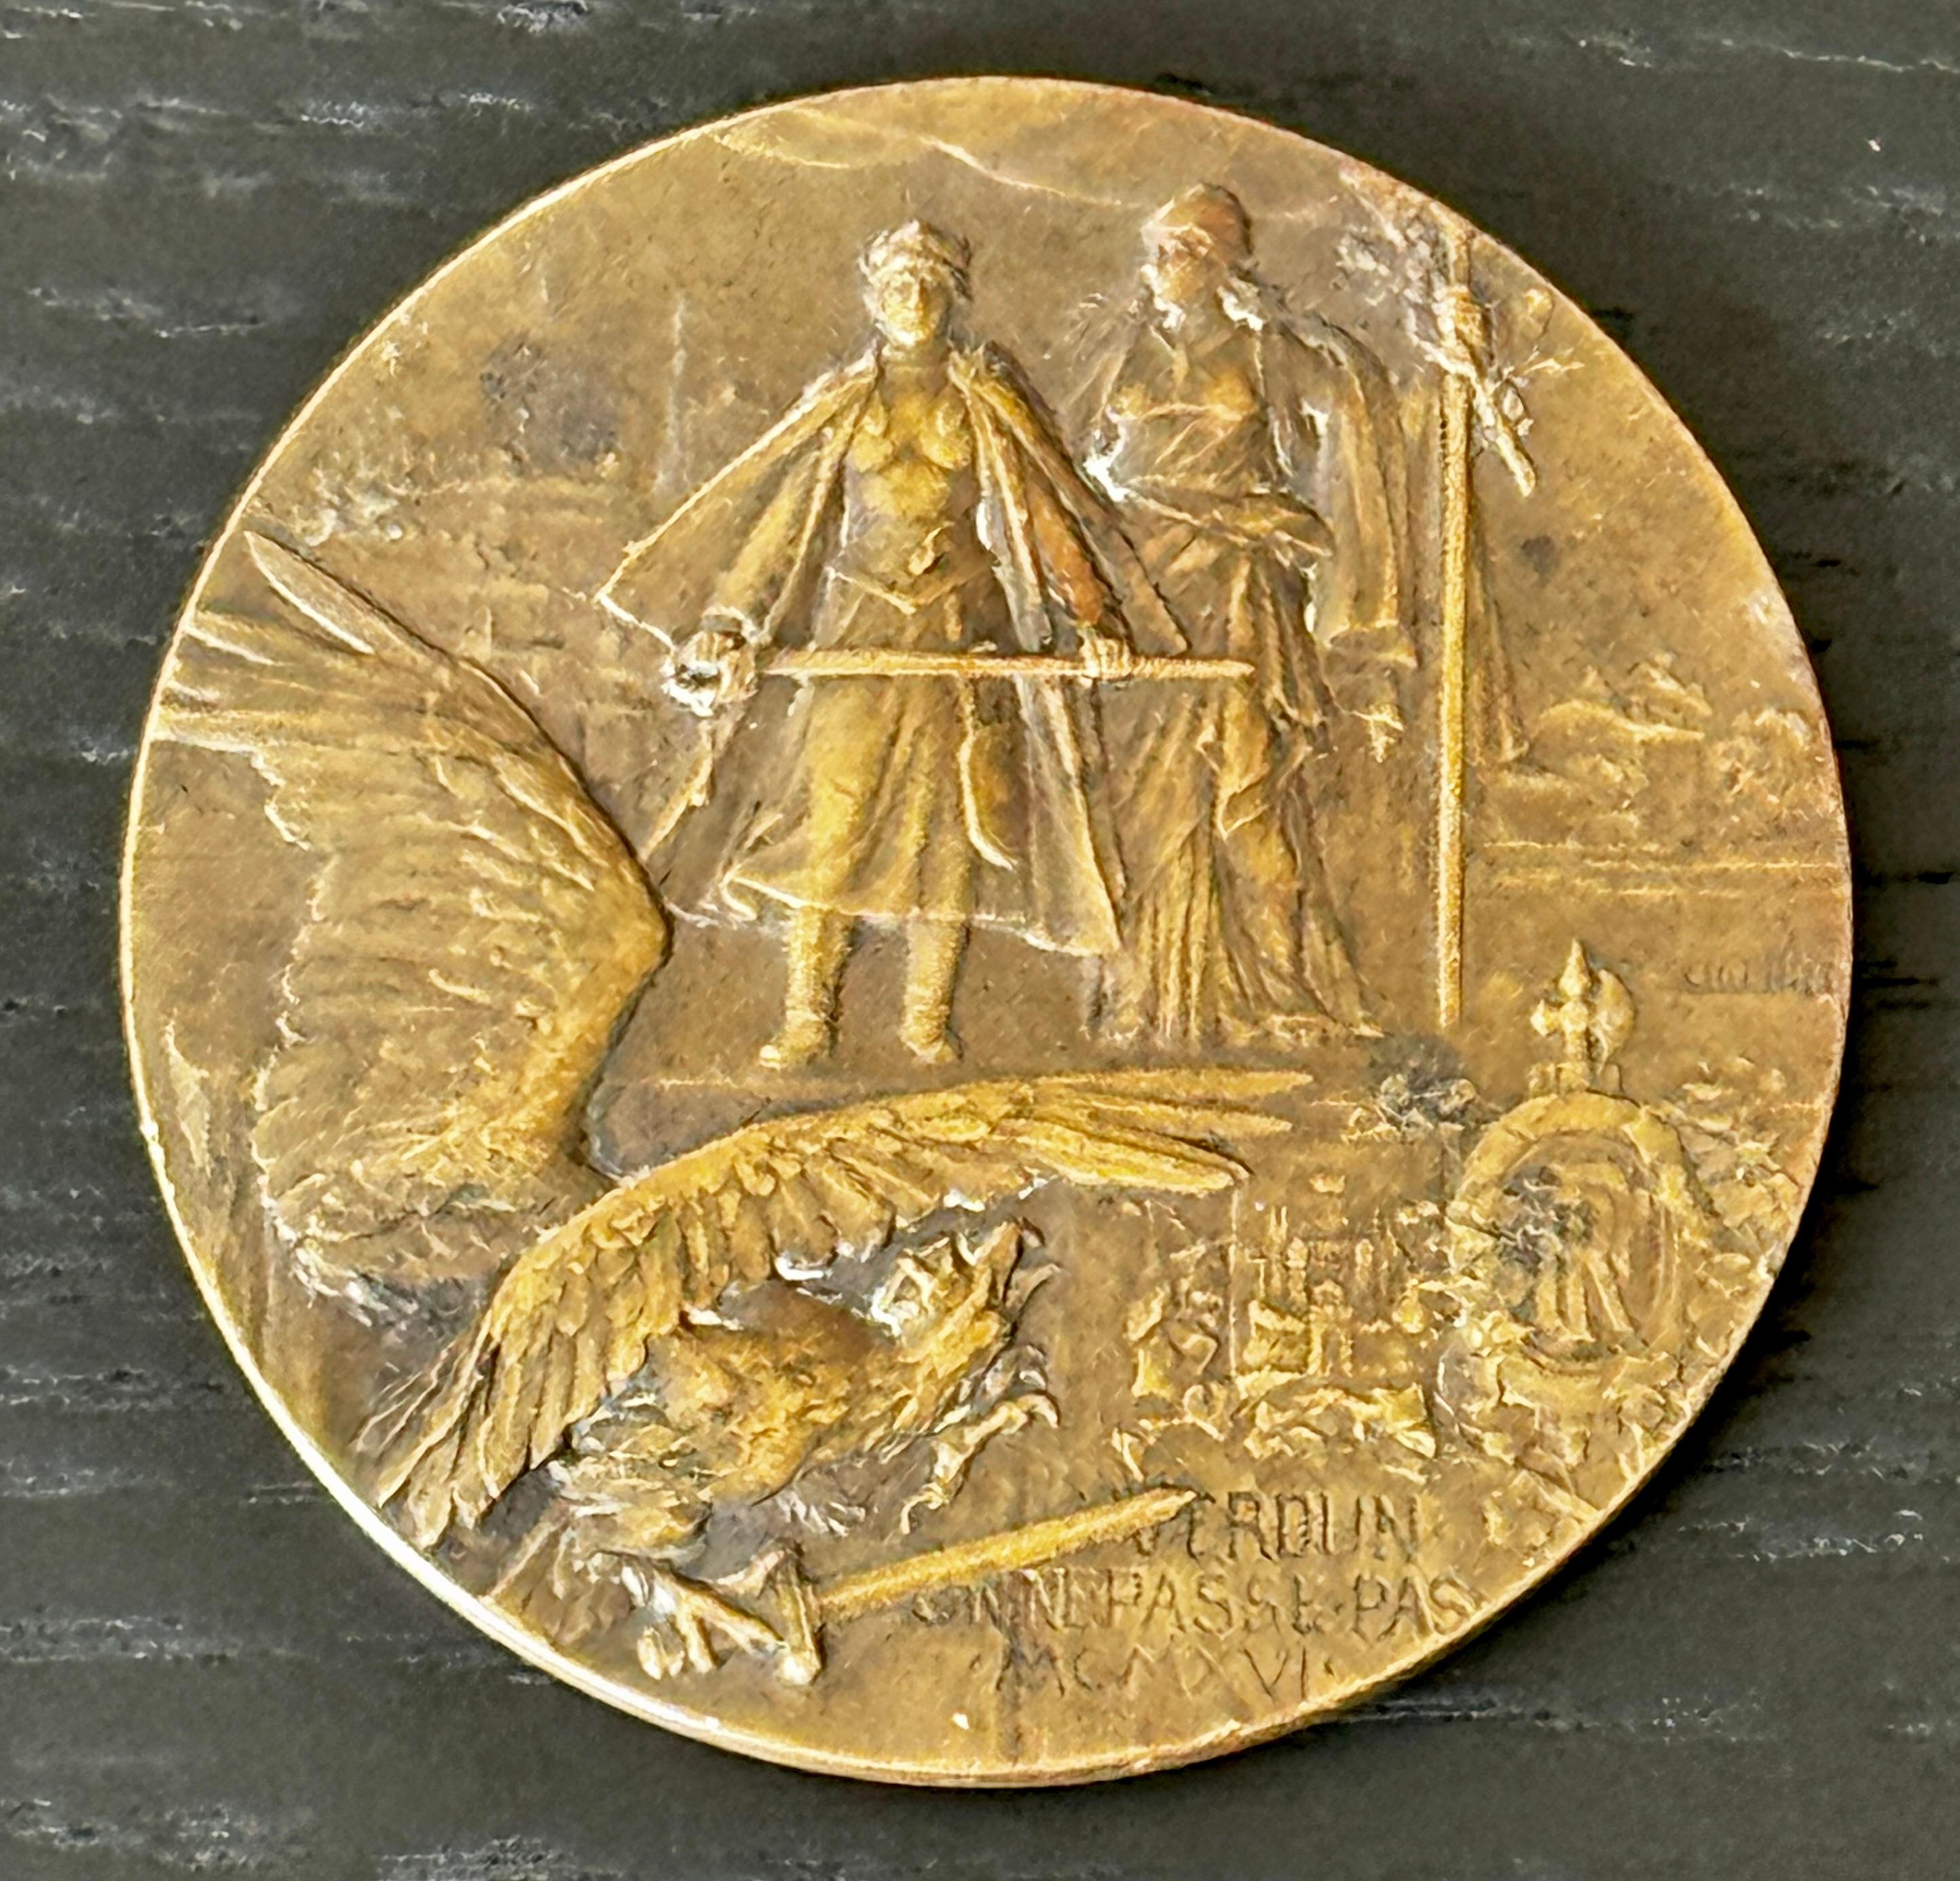 One Bronze Medallion circa 1916 - The Heroes of Verdun Signed by sculptor Charles Pillet

2.75